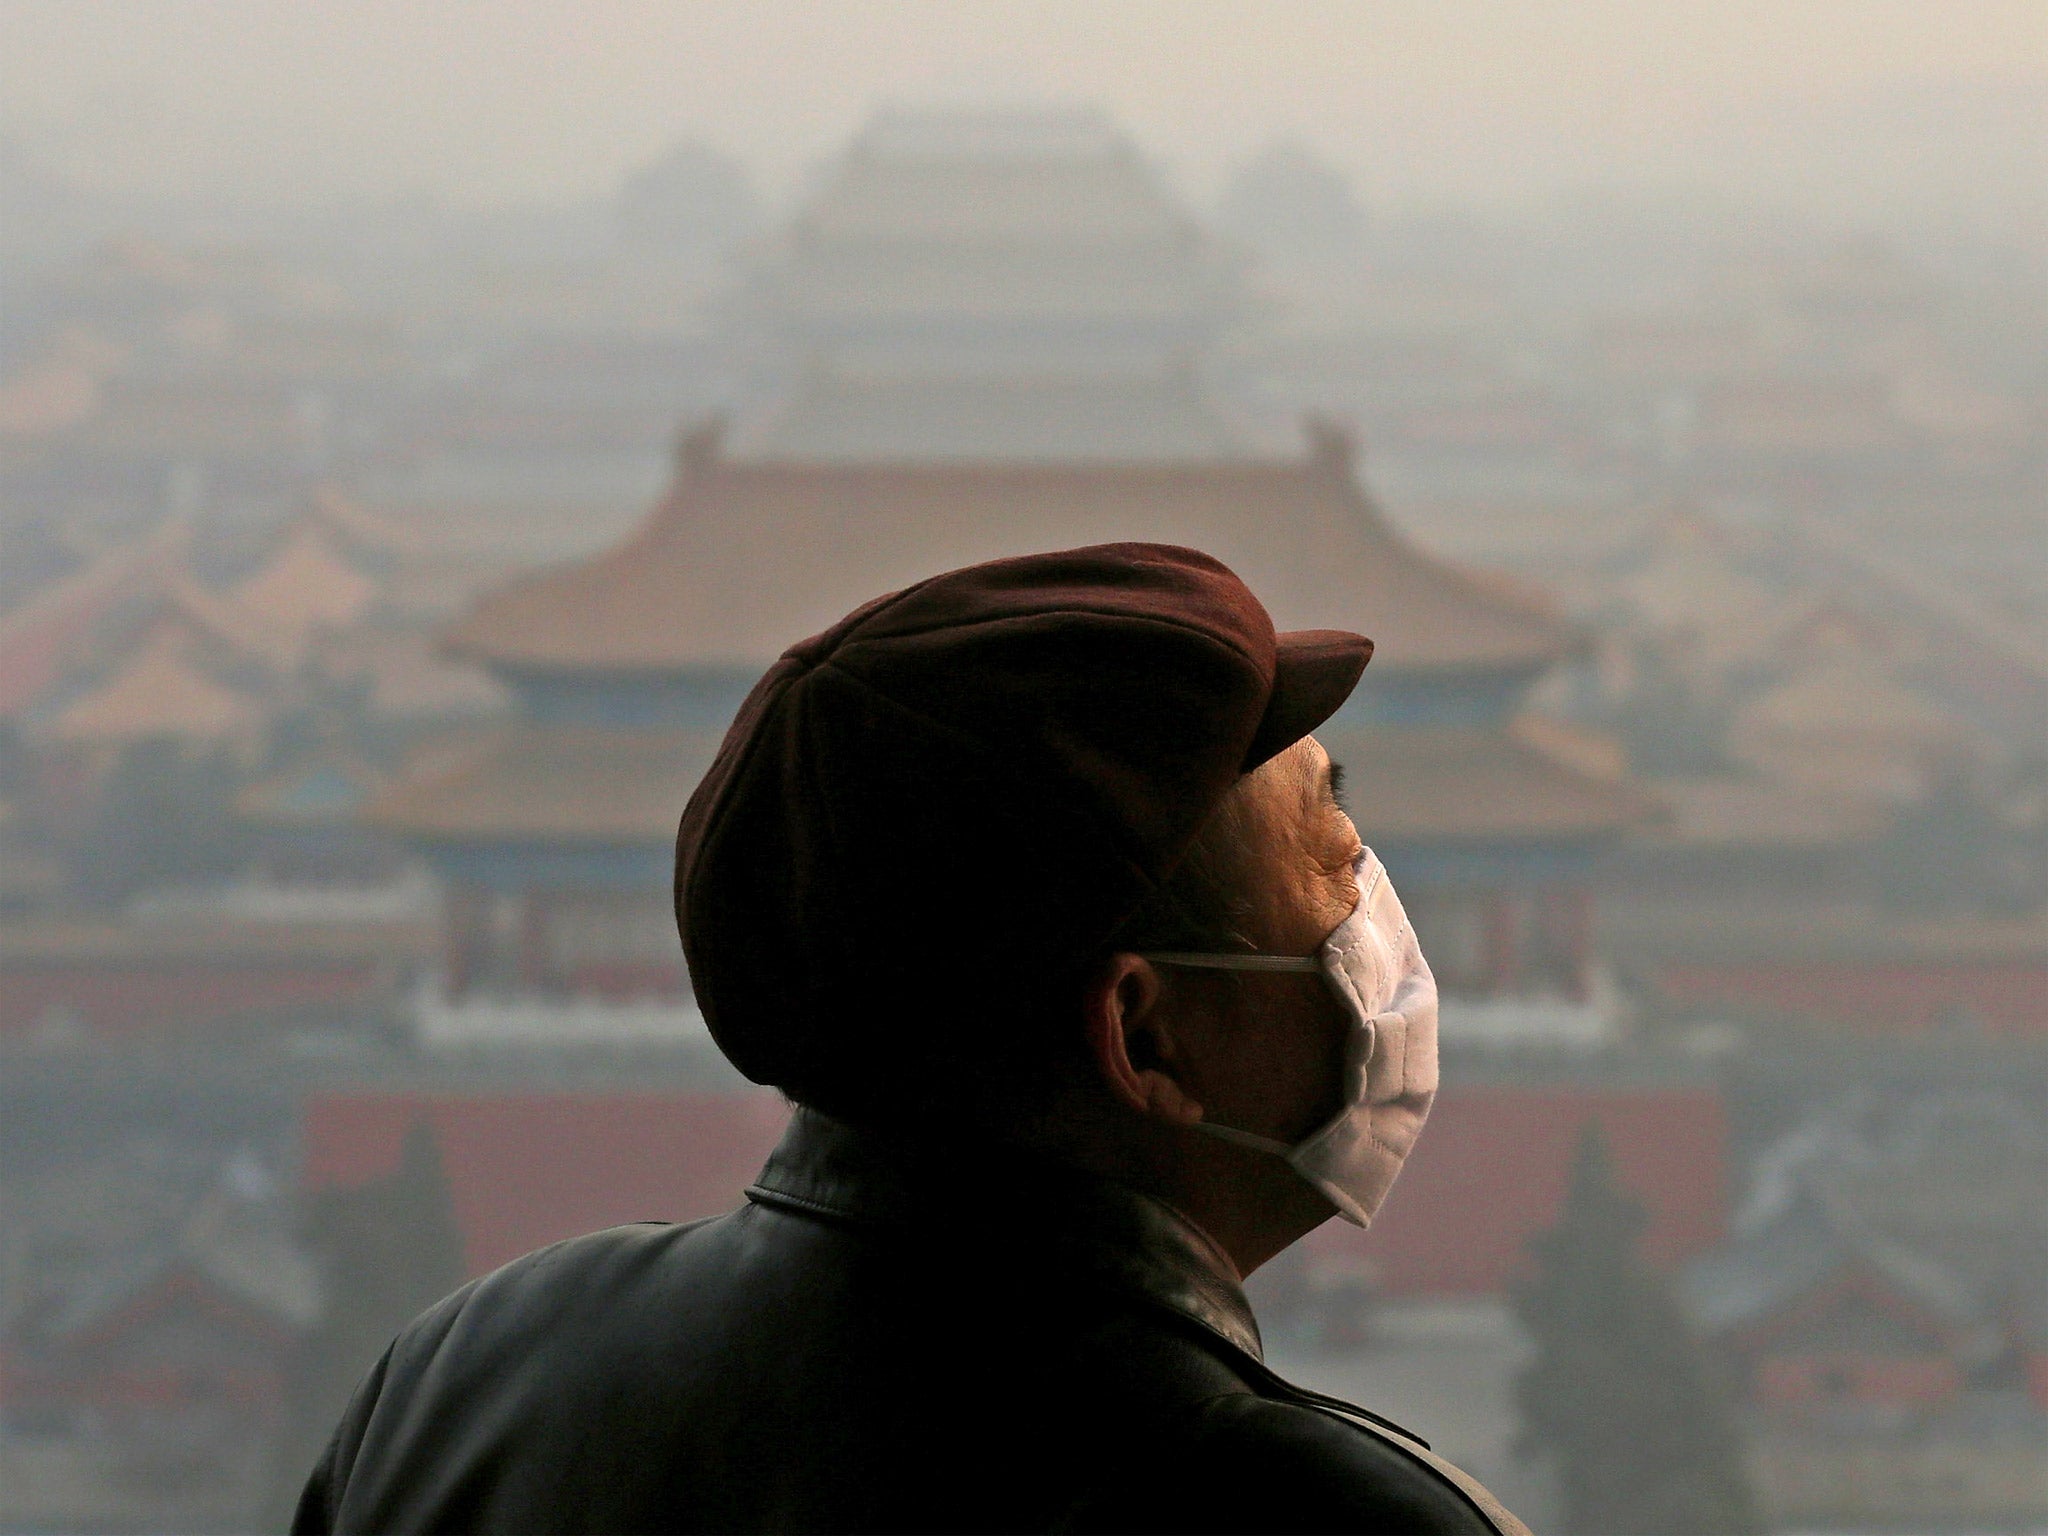 China is the world’s biggest producer of carbon dioxide